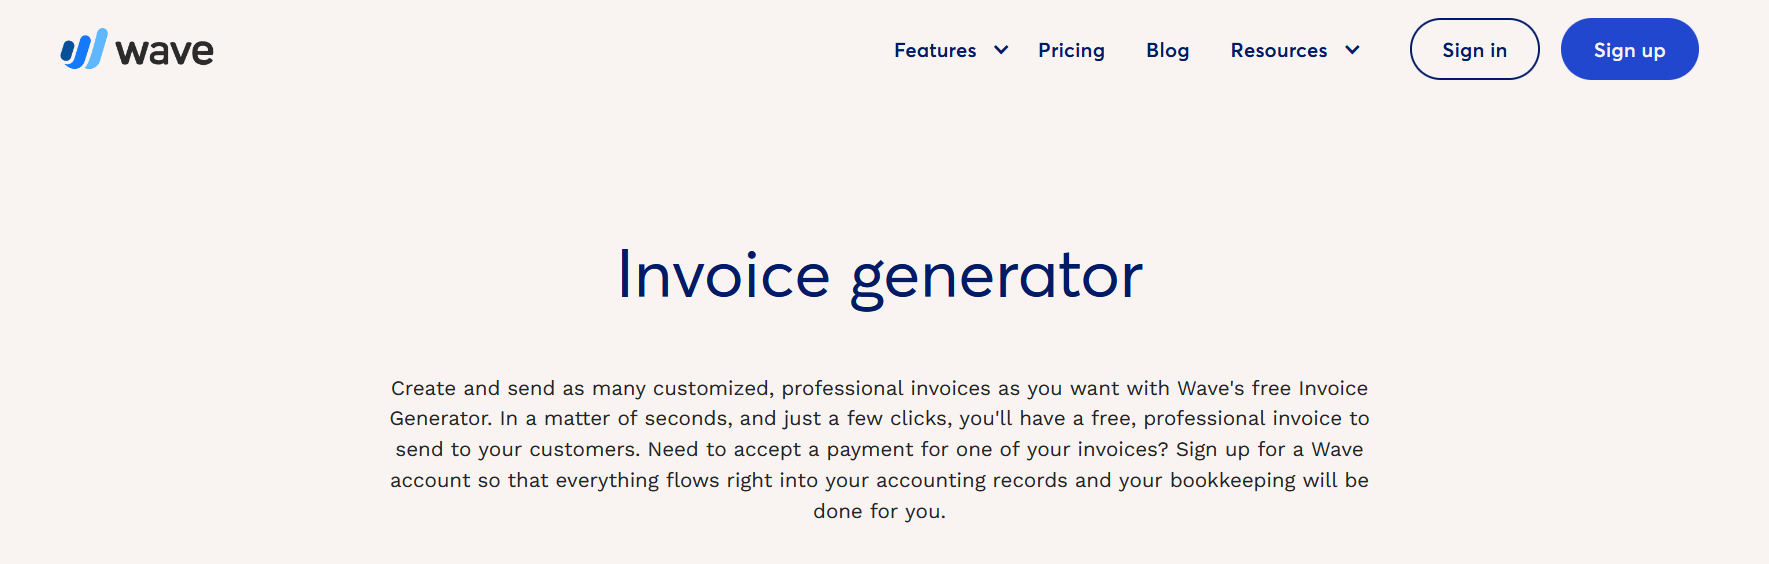 download invoices anytime